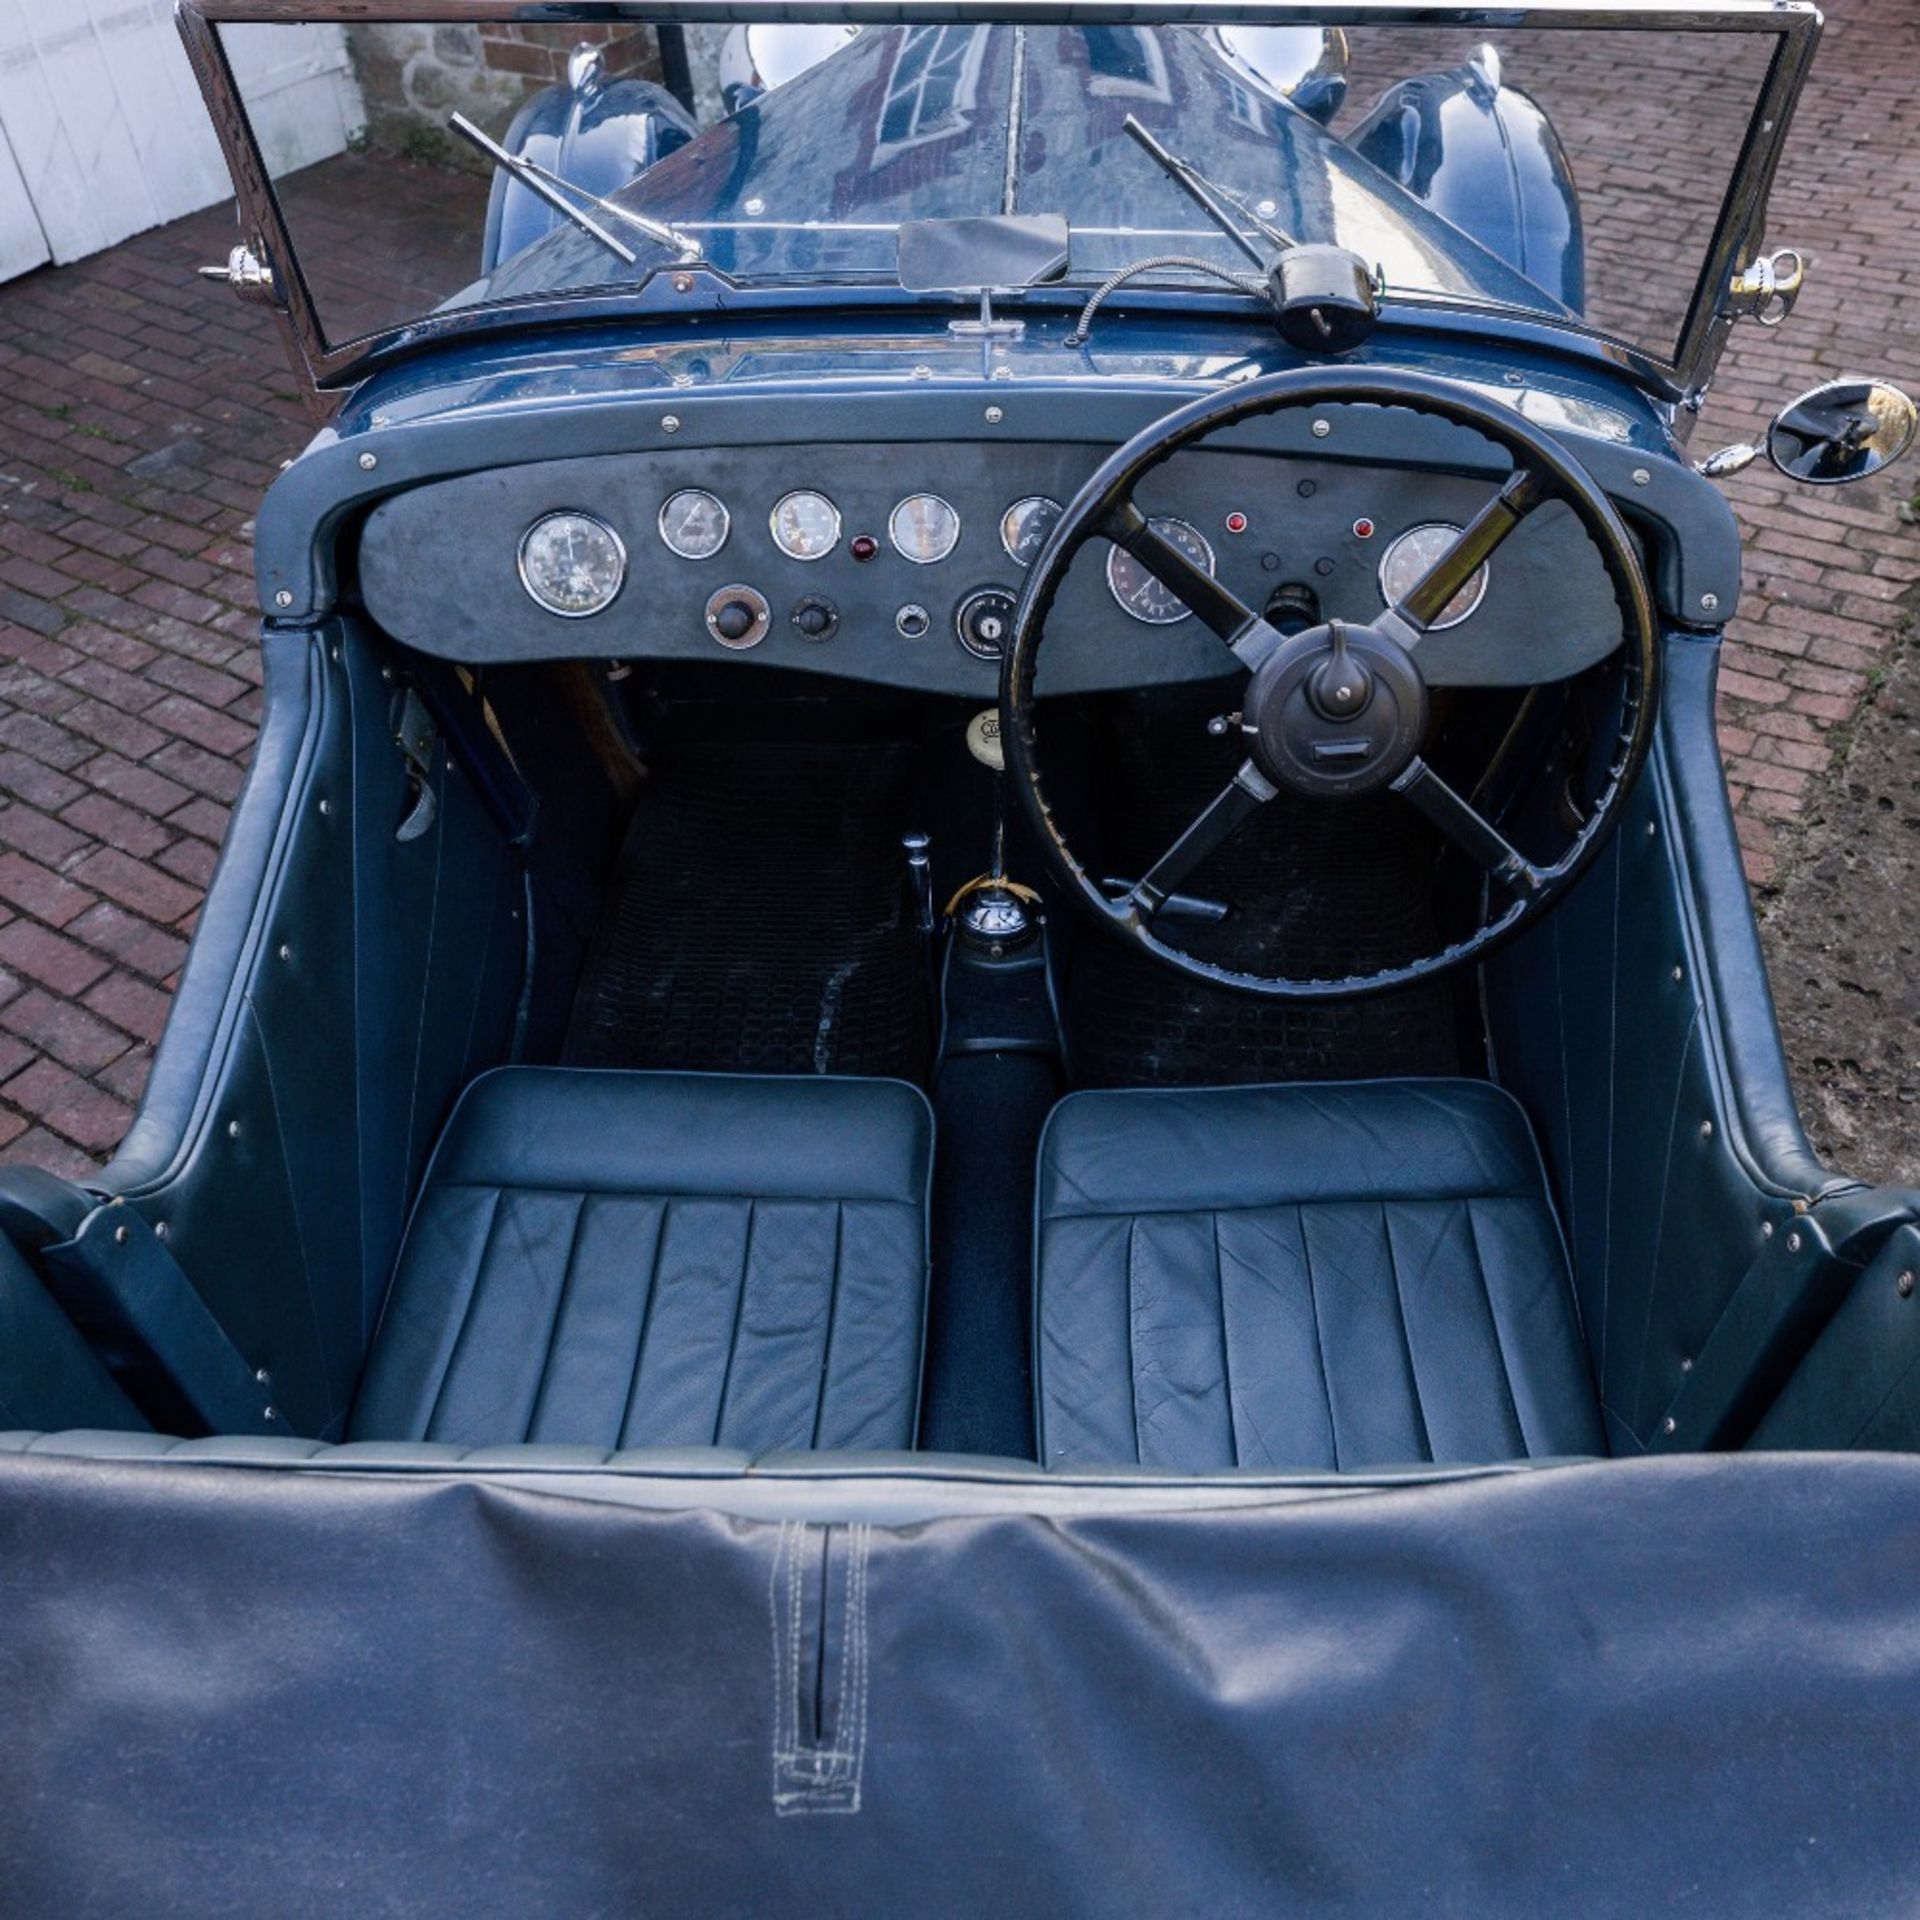 1936 AC 16/70 DROPHEAD COUPE SPECIAL - "BERTIE"                Registration Number: DPH 43 Chassis - Image 10 of 16